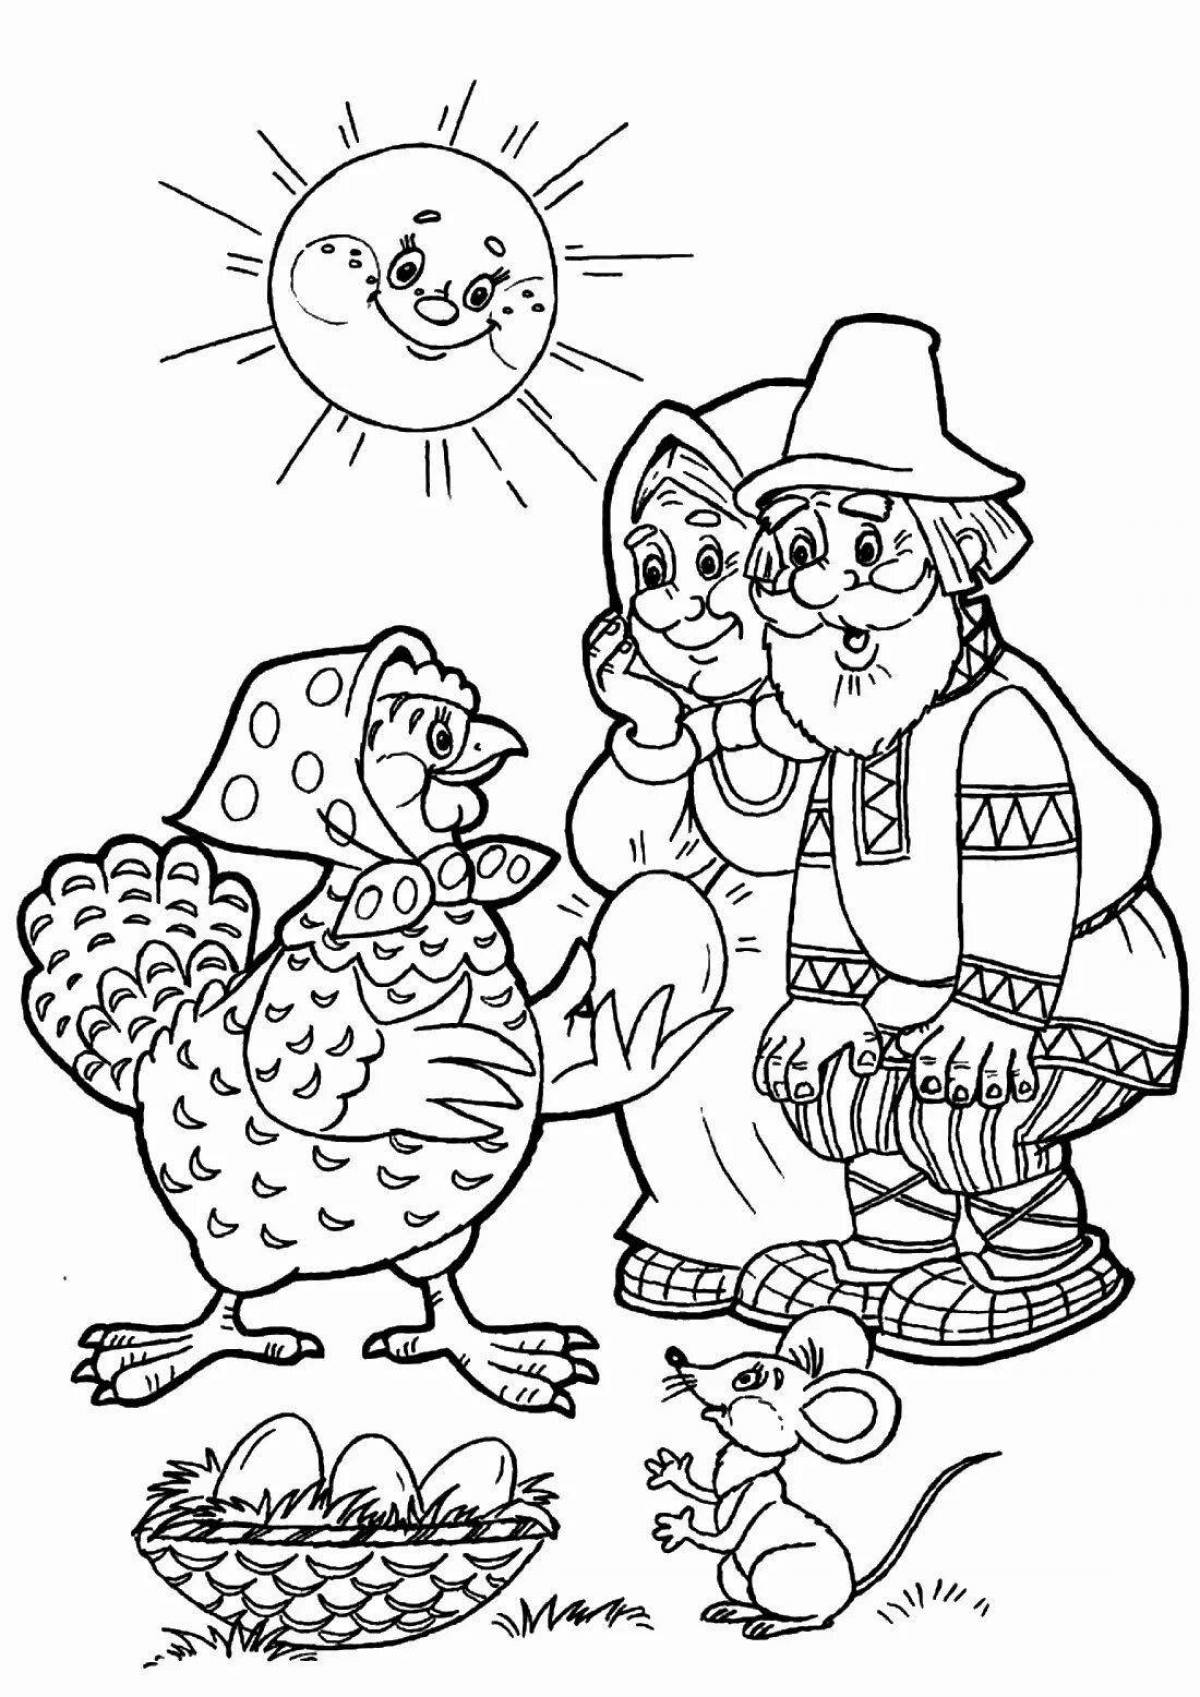 Inspirational chicken pockmarked coloring book for kids